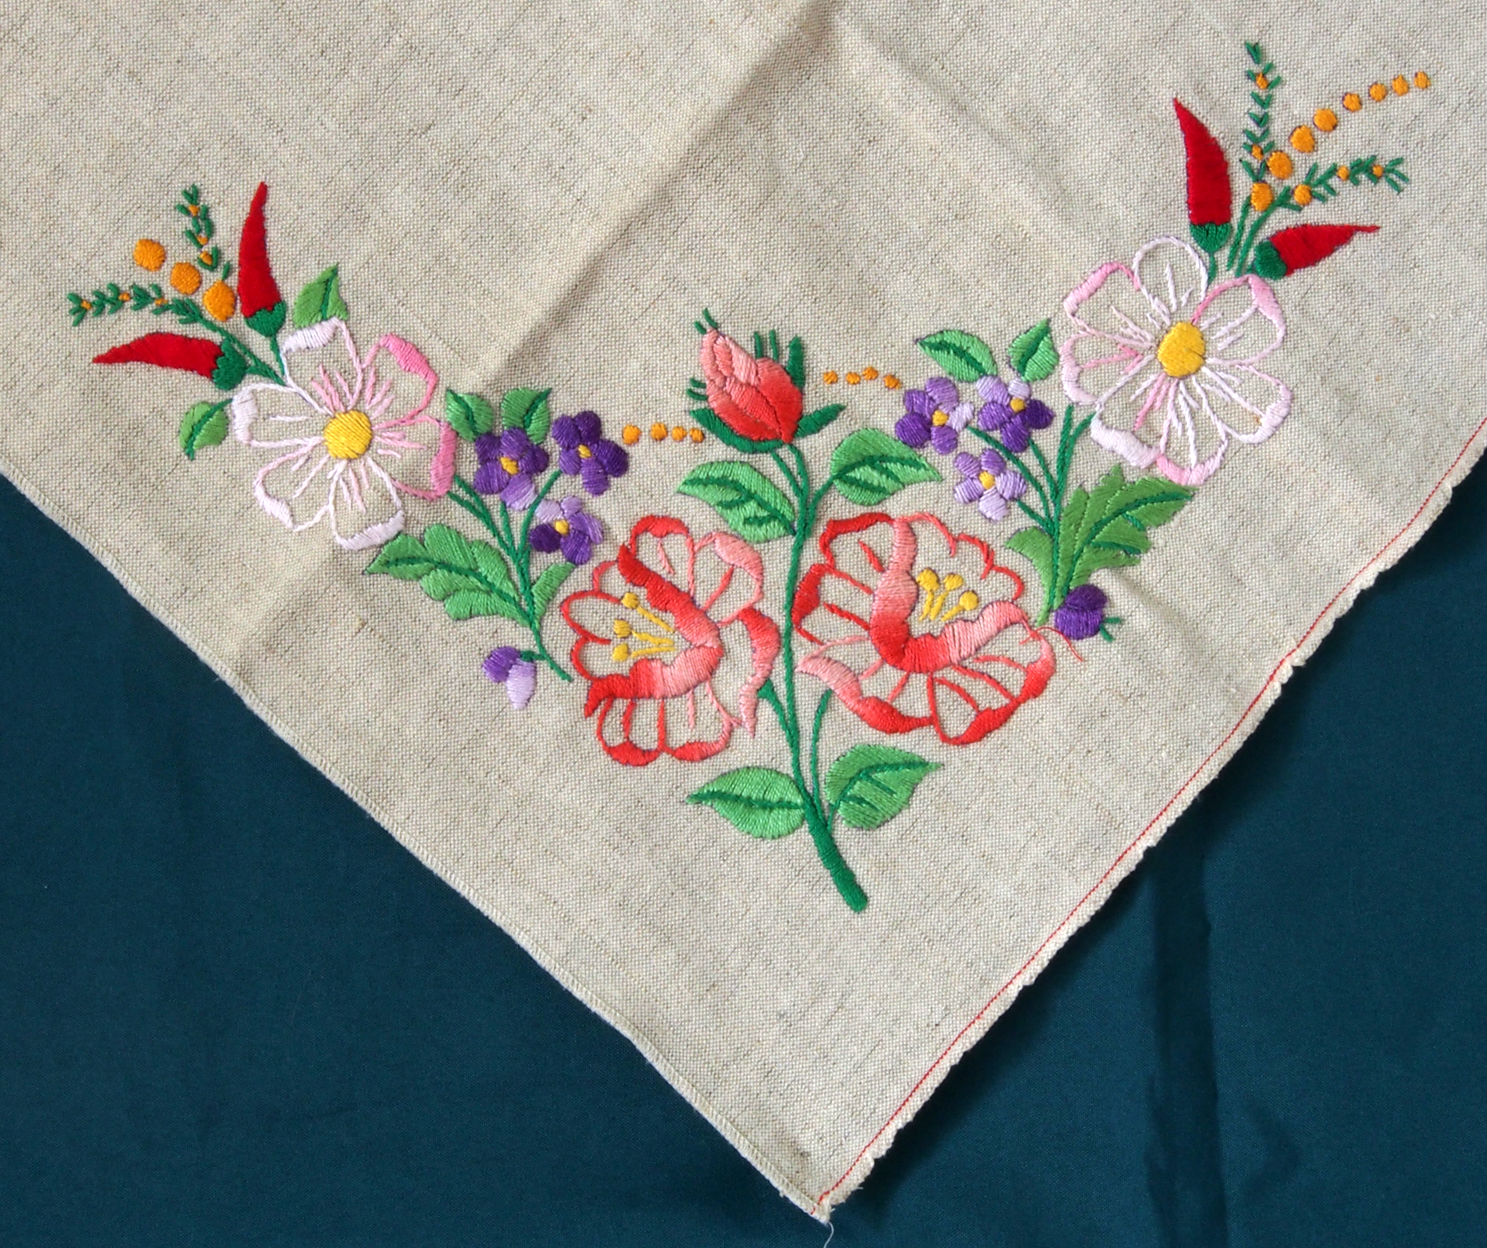 Hungarian Embroidery